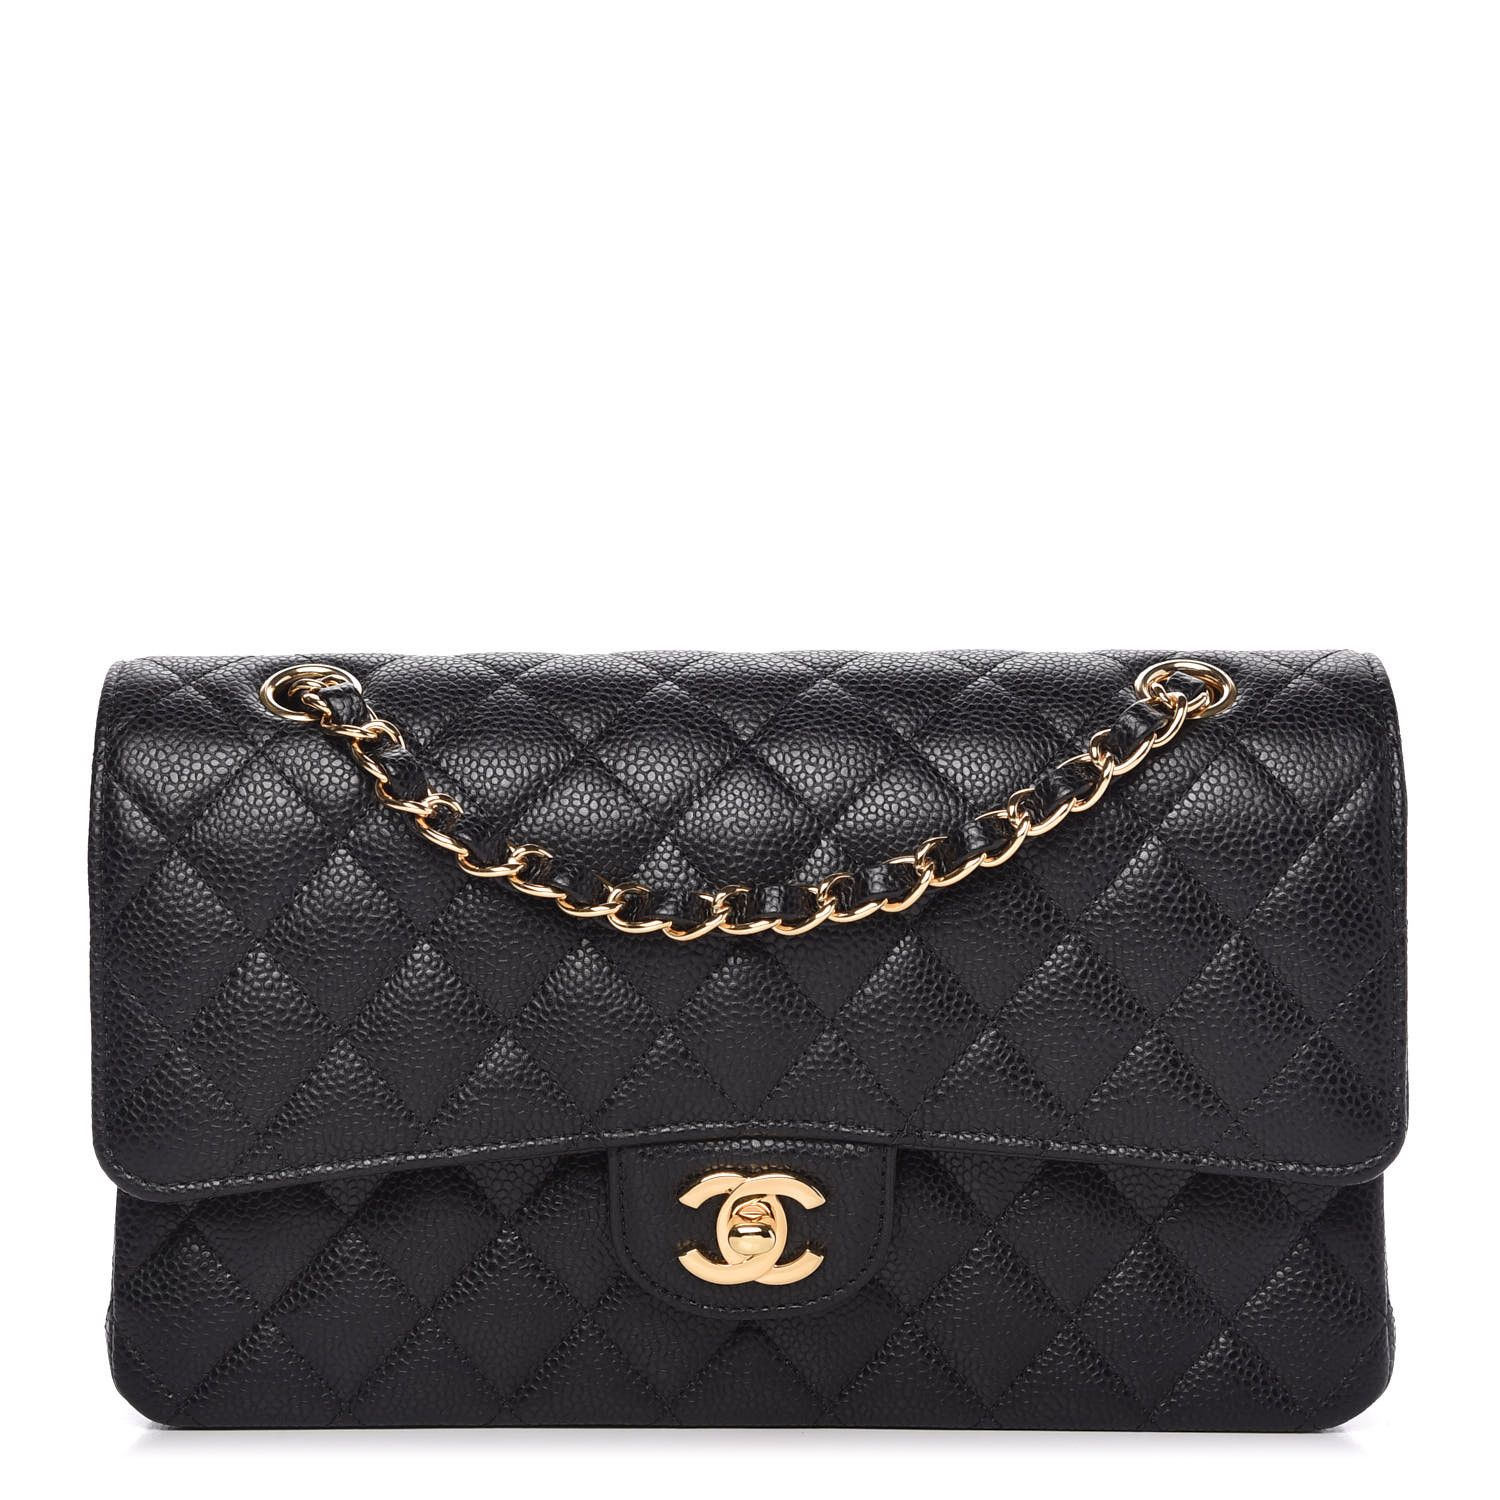 Caviar Quilted Medium Double Flap Black | Fashionphile